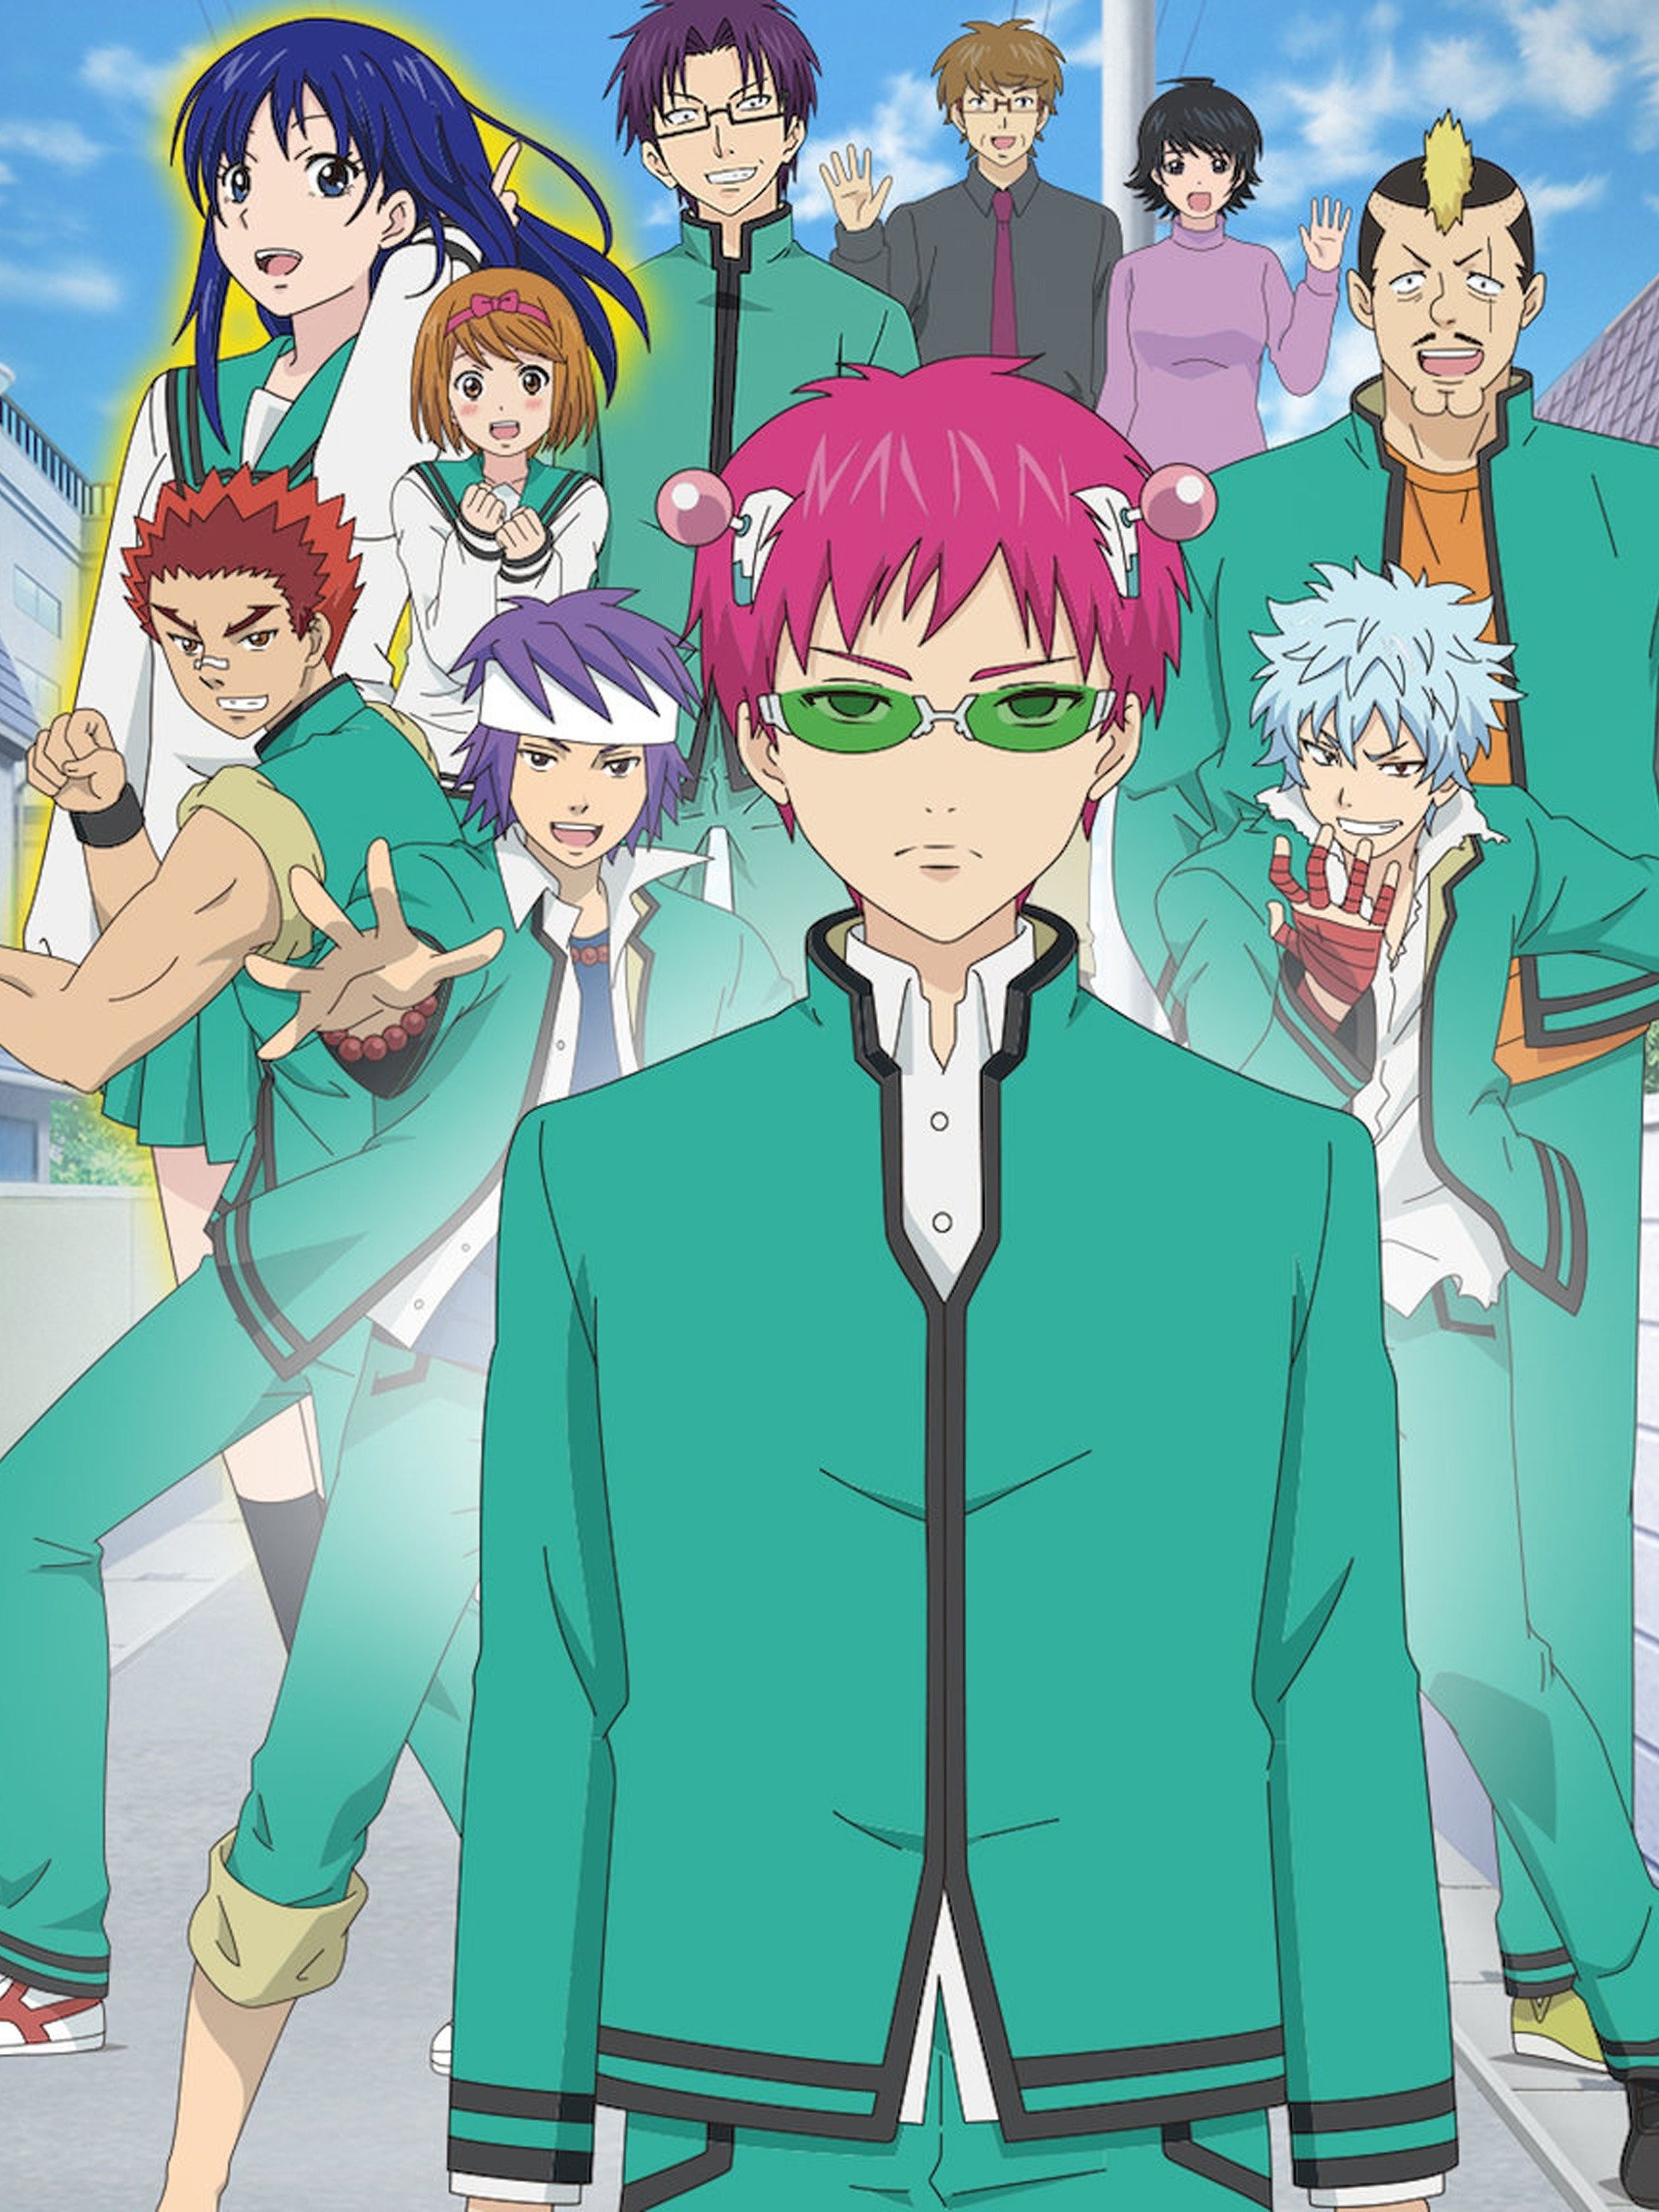 How To Build a Series: The Disastrous Life of Saiki K. Reawakened |  Confessions of an Overage otaku